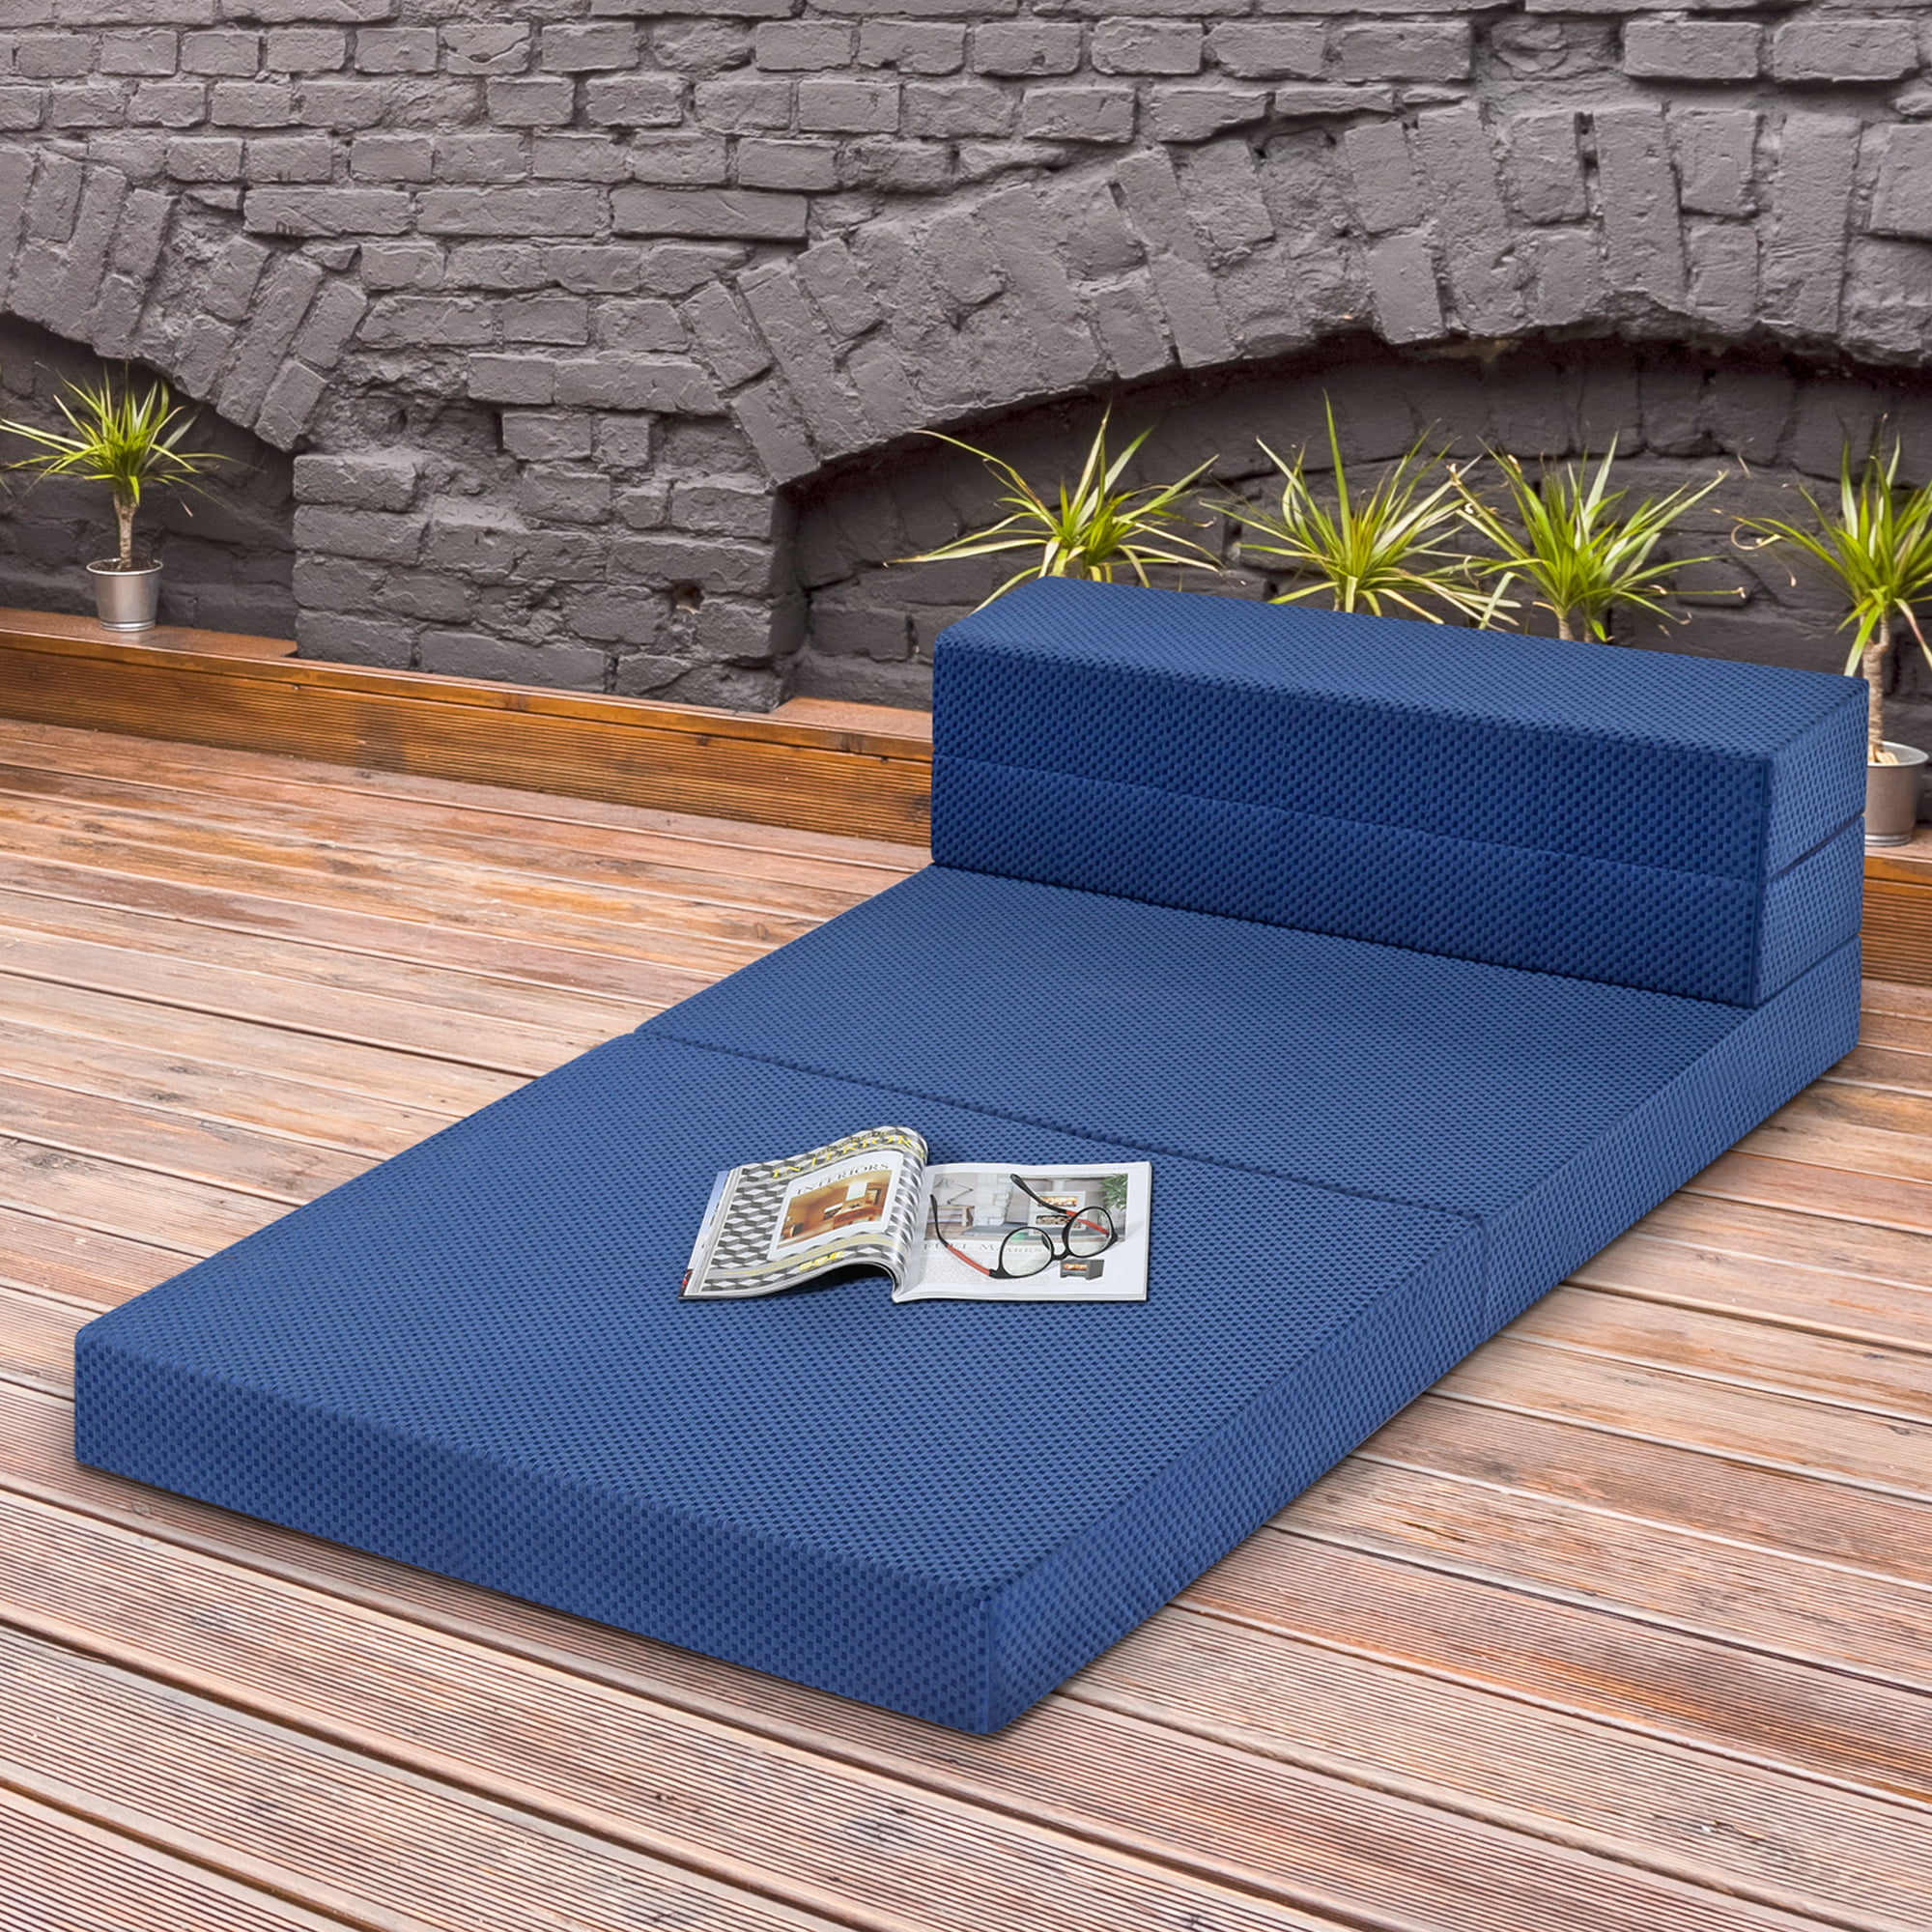 Sleeplace TriFold Sofa Bed, Blue